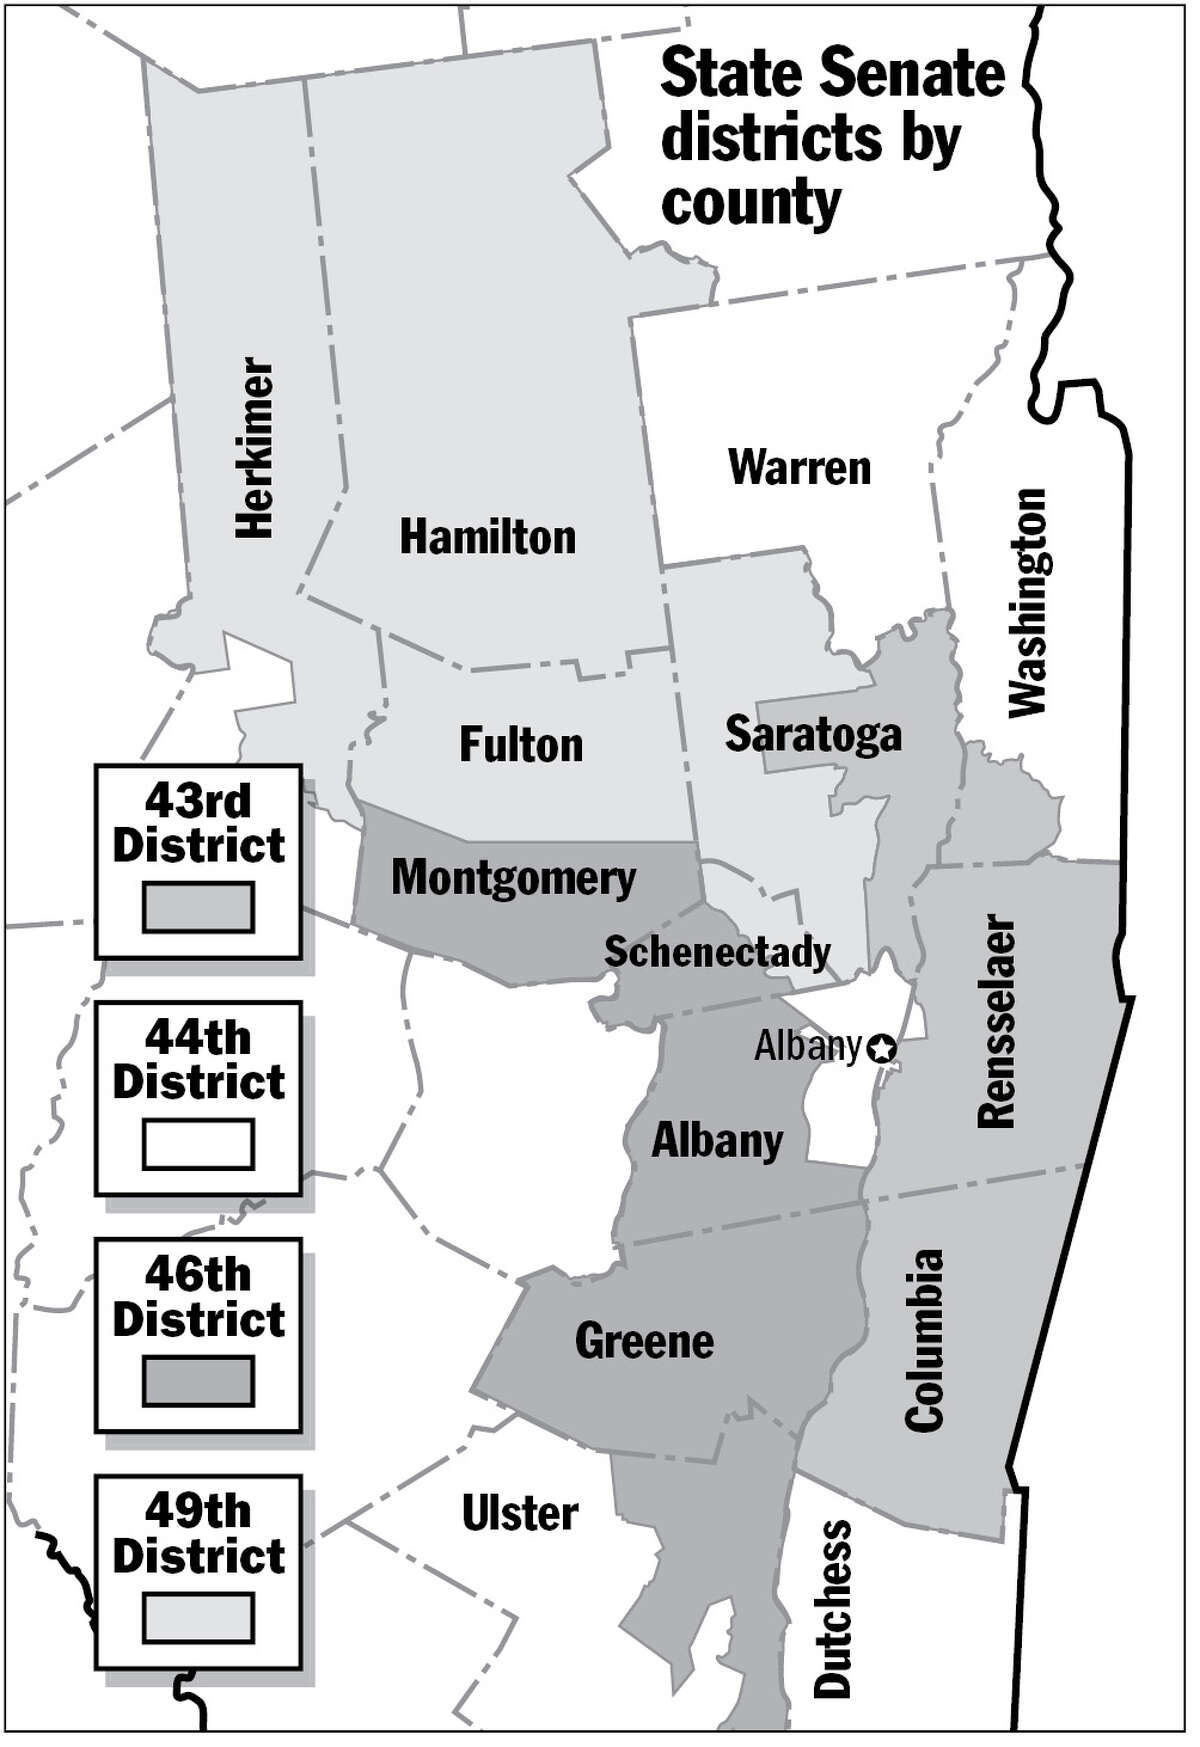 State Senate districts by county.